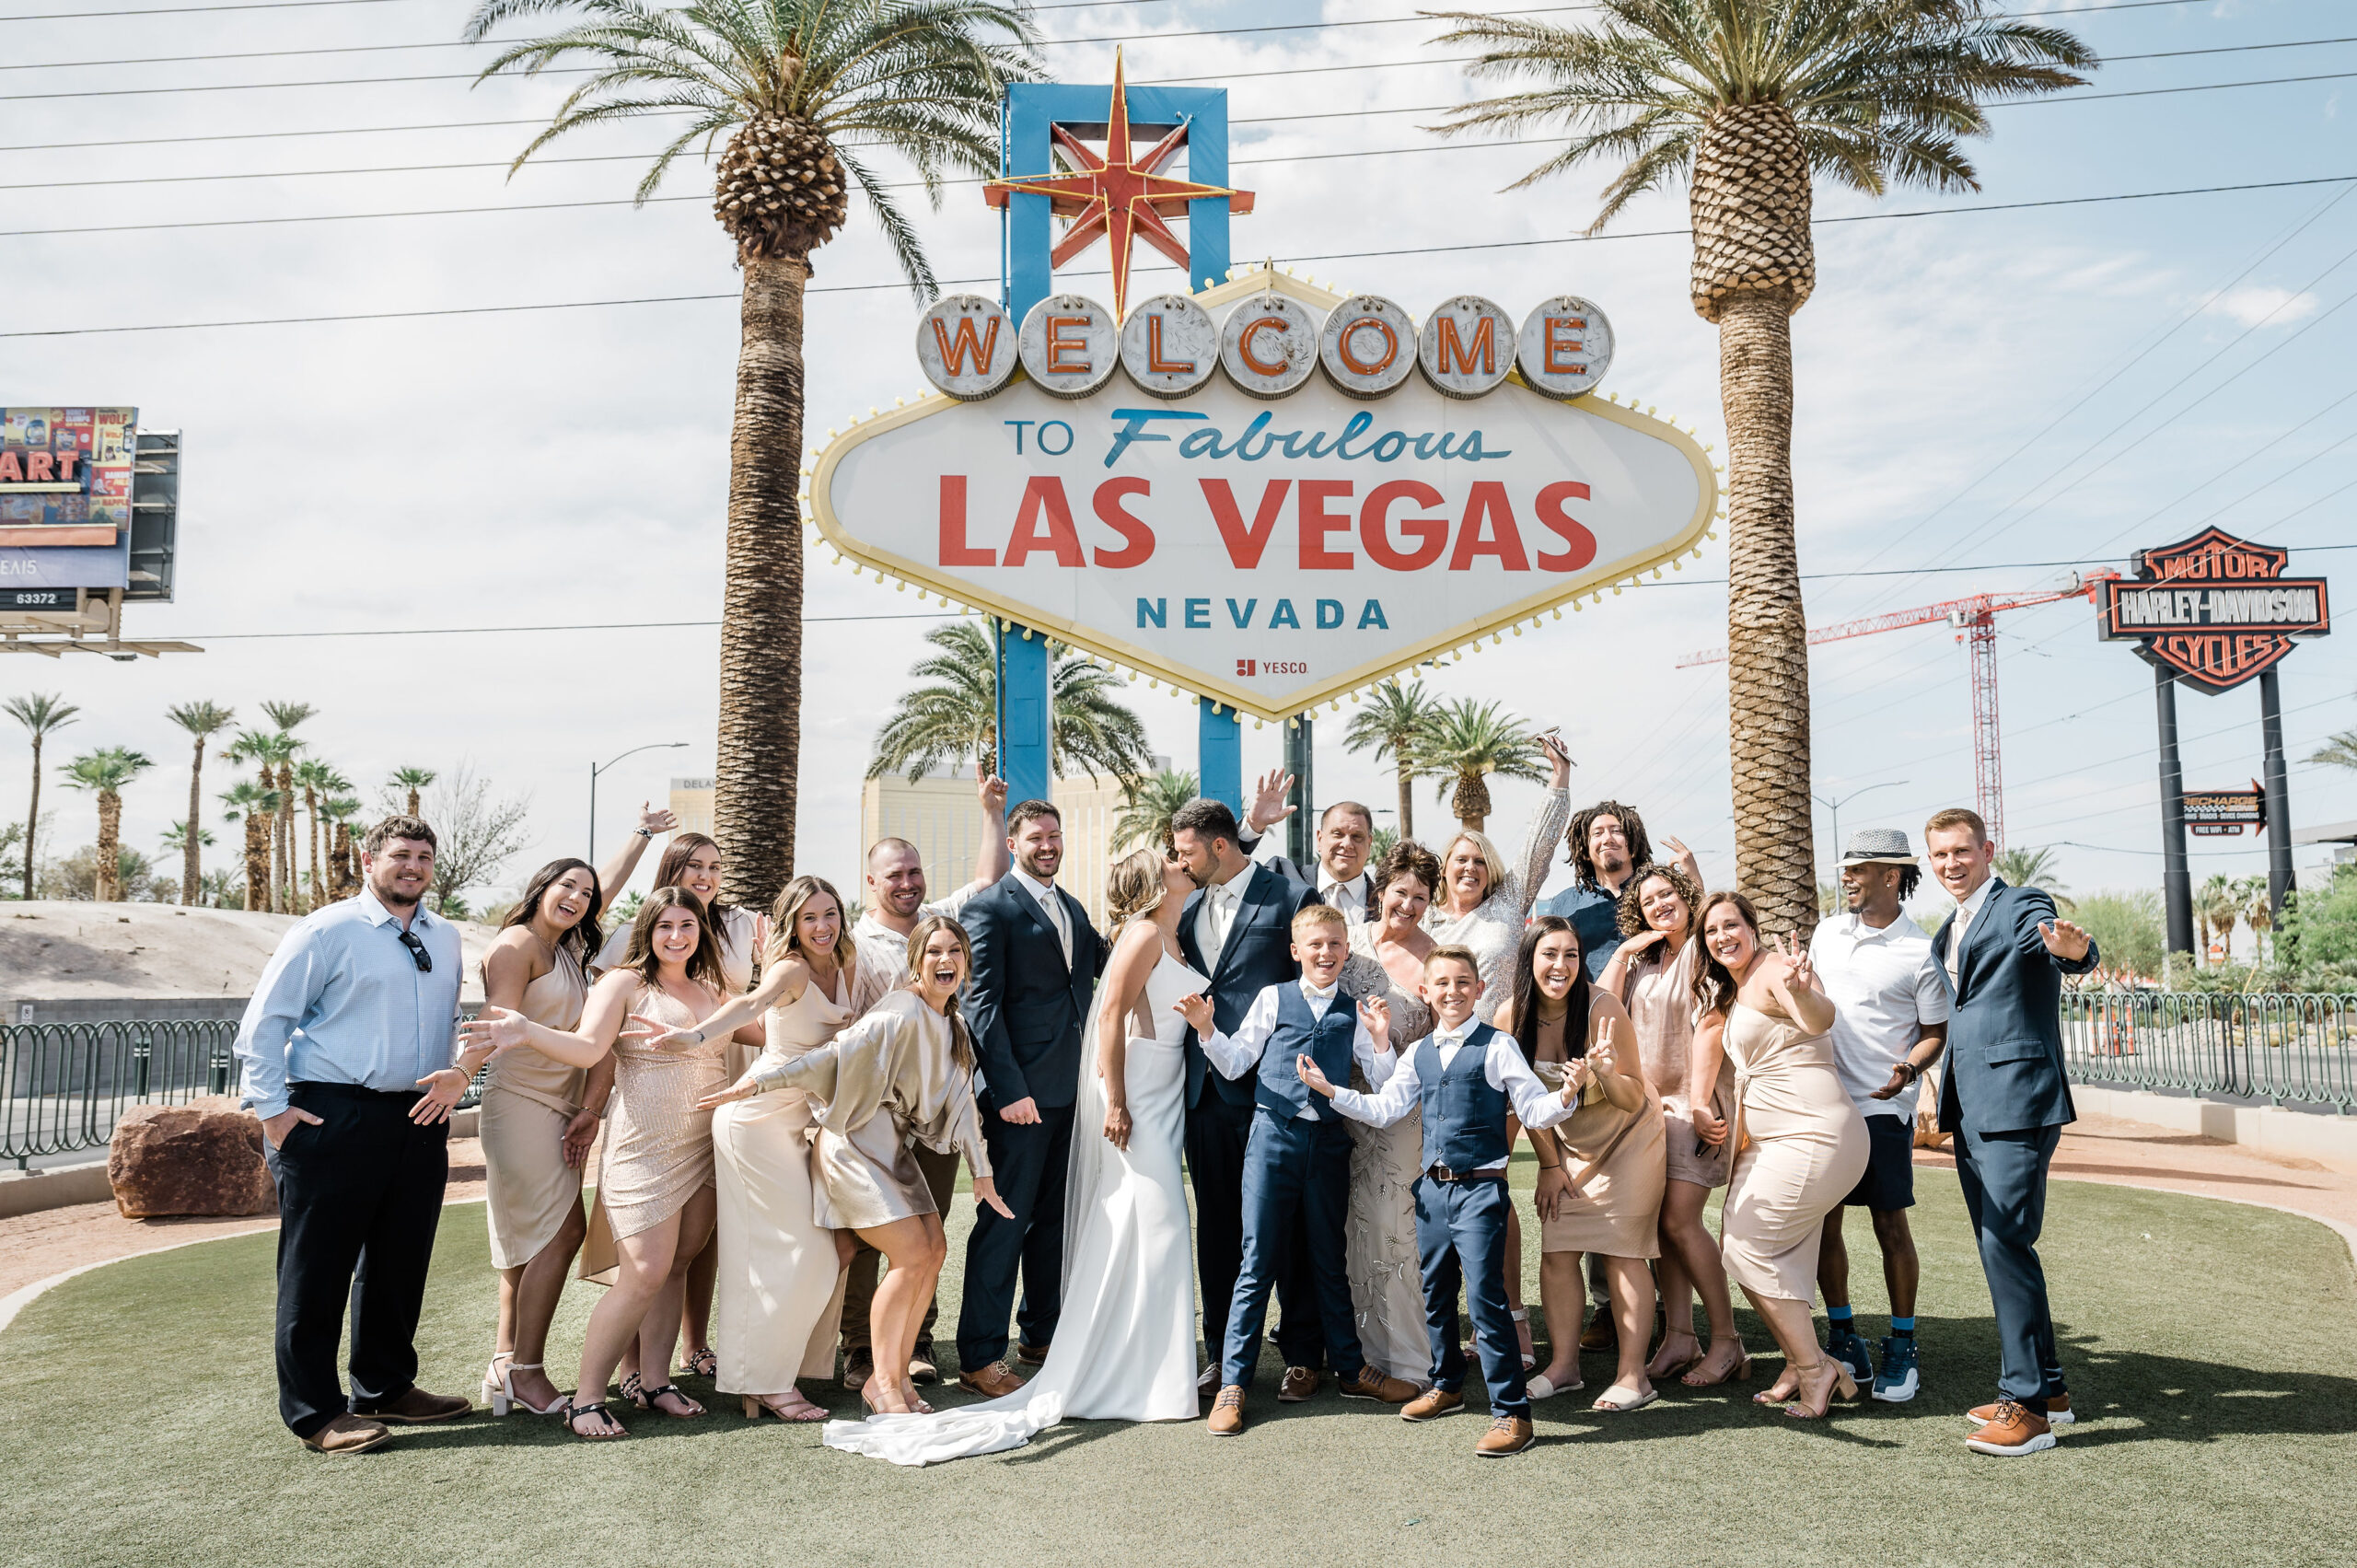 Bride and groom sharing a kiss during their wedding shoot with their family at the Las Vegas welcome sign